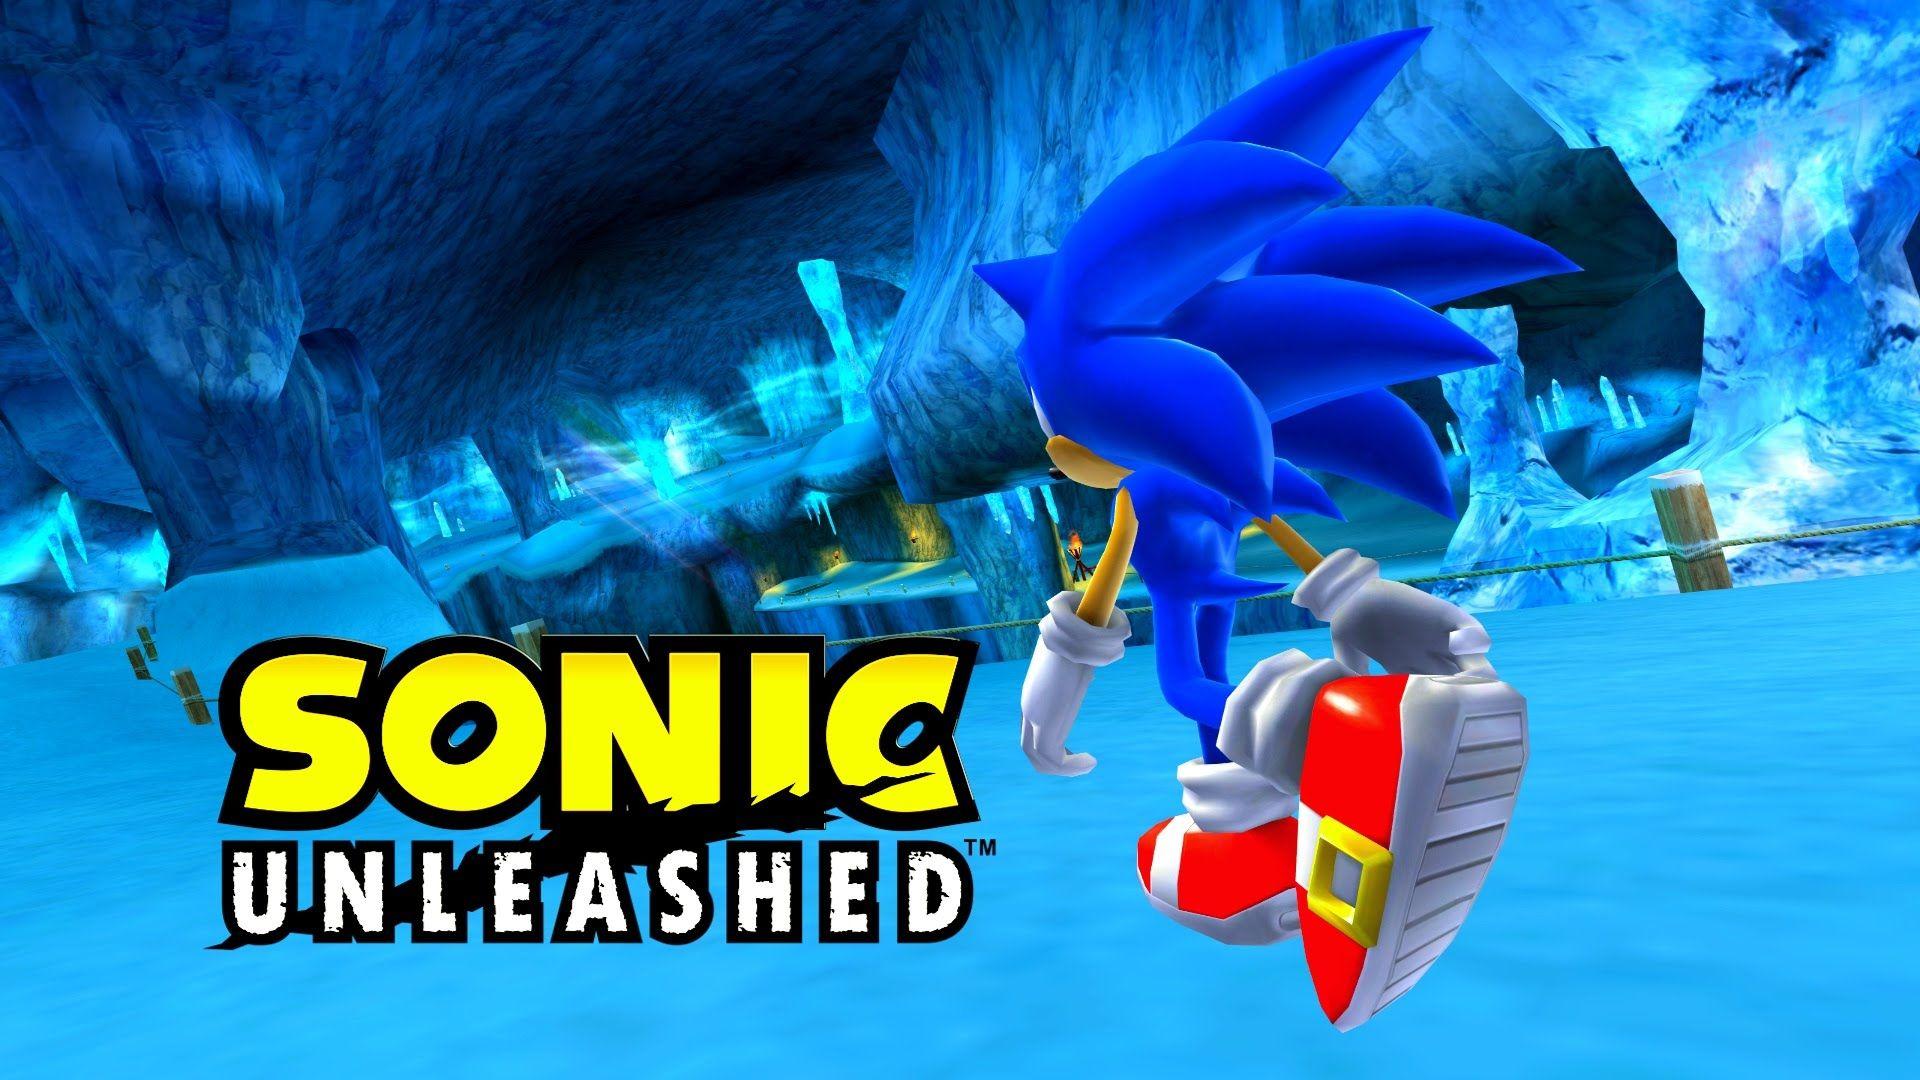 Sonic Unleashed Wii Edge Day [Full HD 1080p]